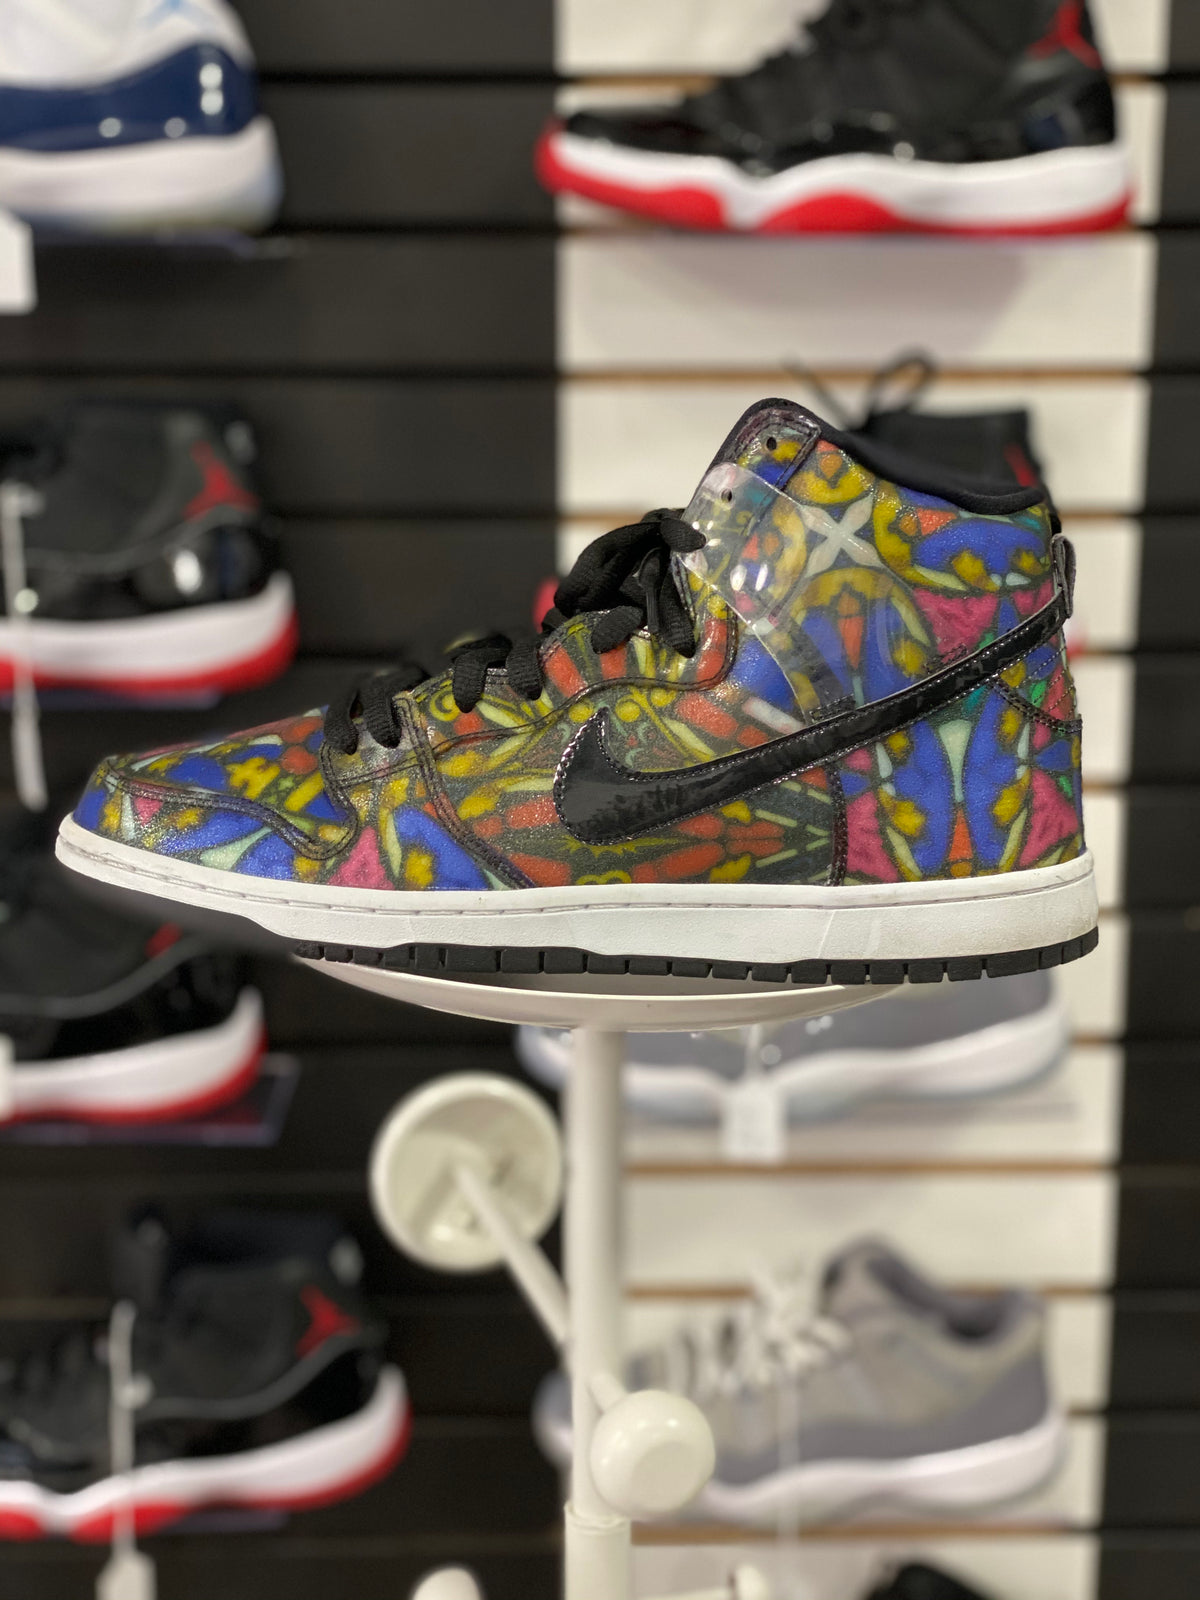 Nike Dunk SB High Cncpts "Stained Glass"